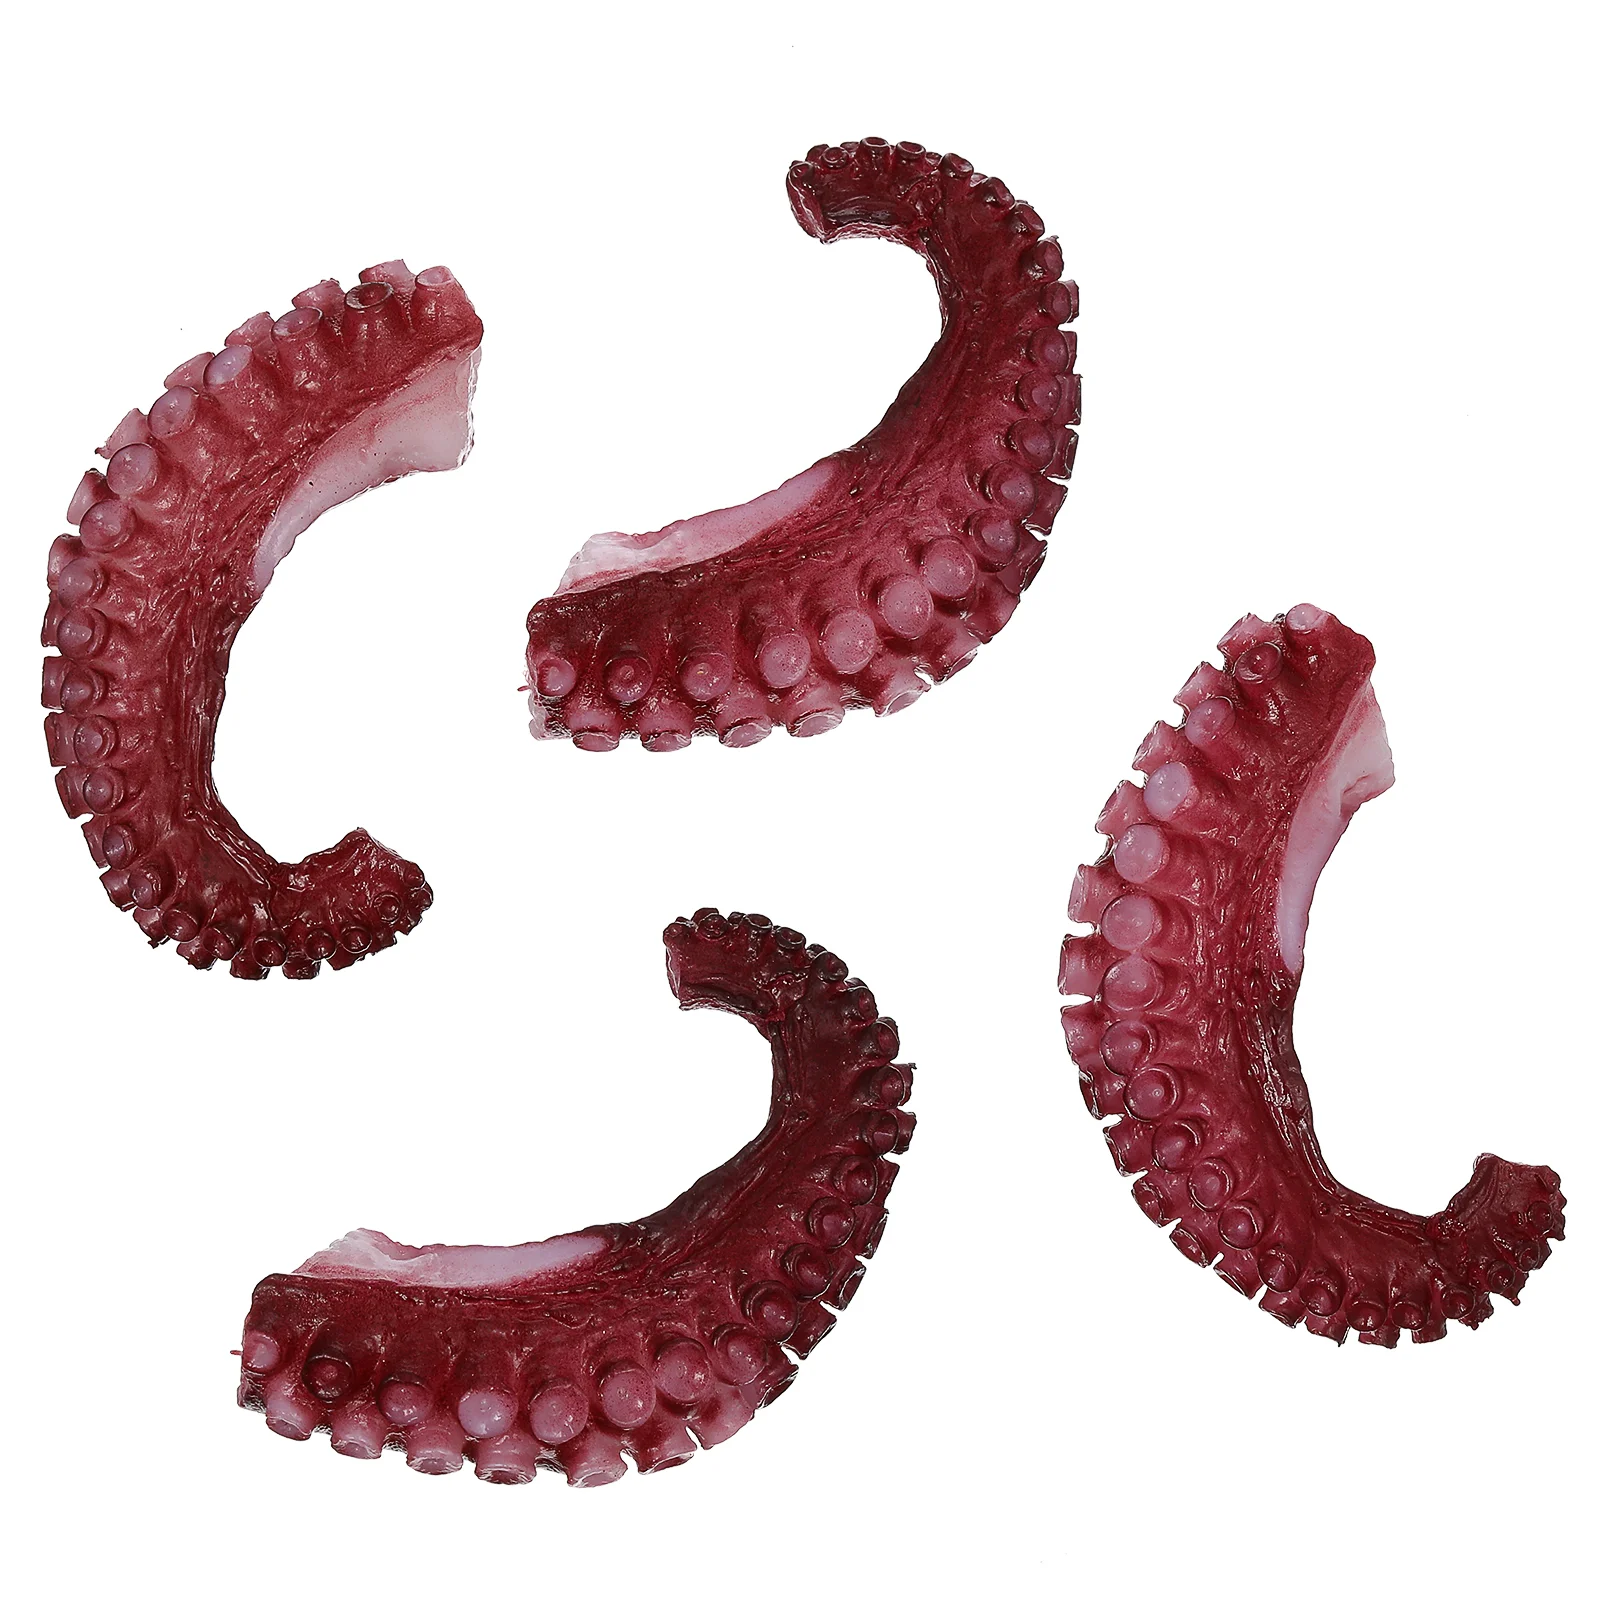 

4 Pcs Squid Sea Decor Fake Octopus Claw Artificial Seafood Models Realistic Claws Ocean Simulation Adornment Pvc Child